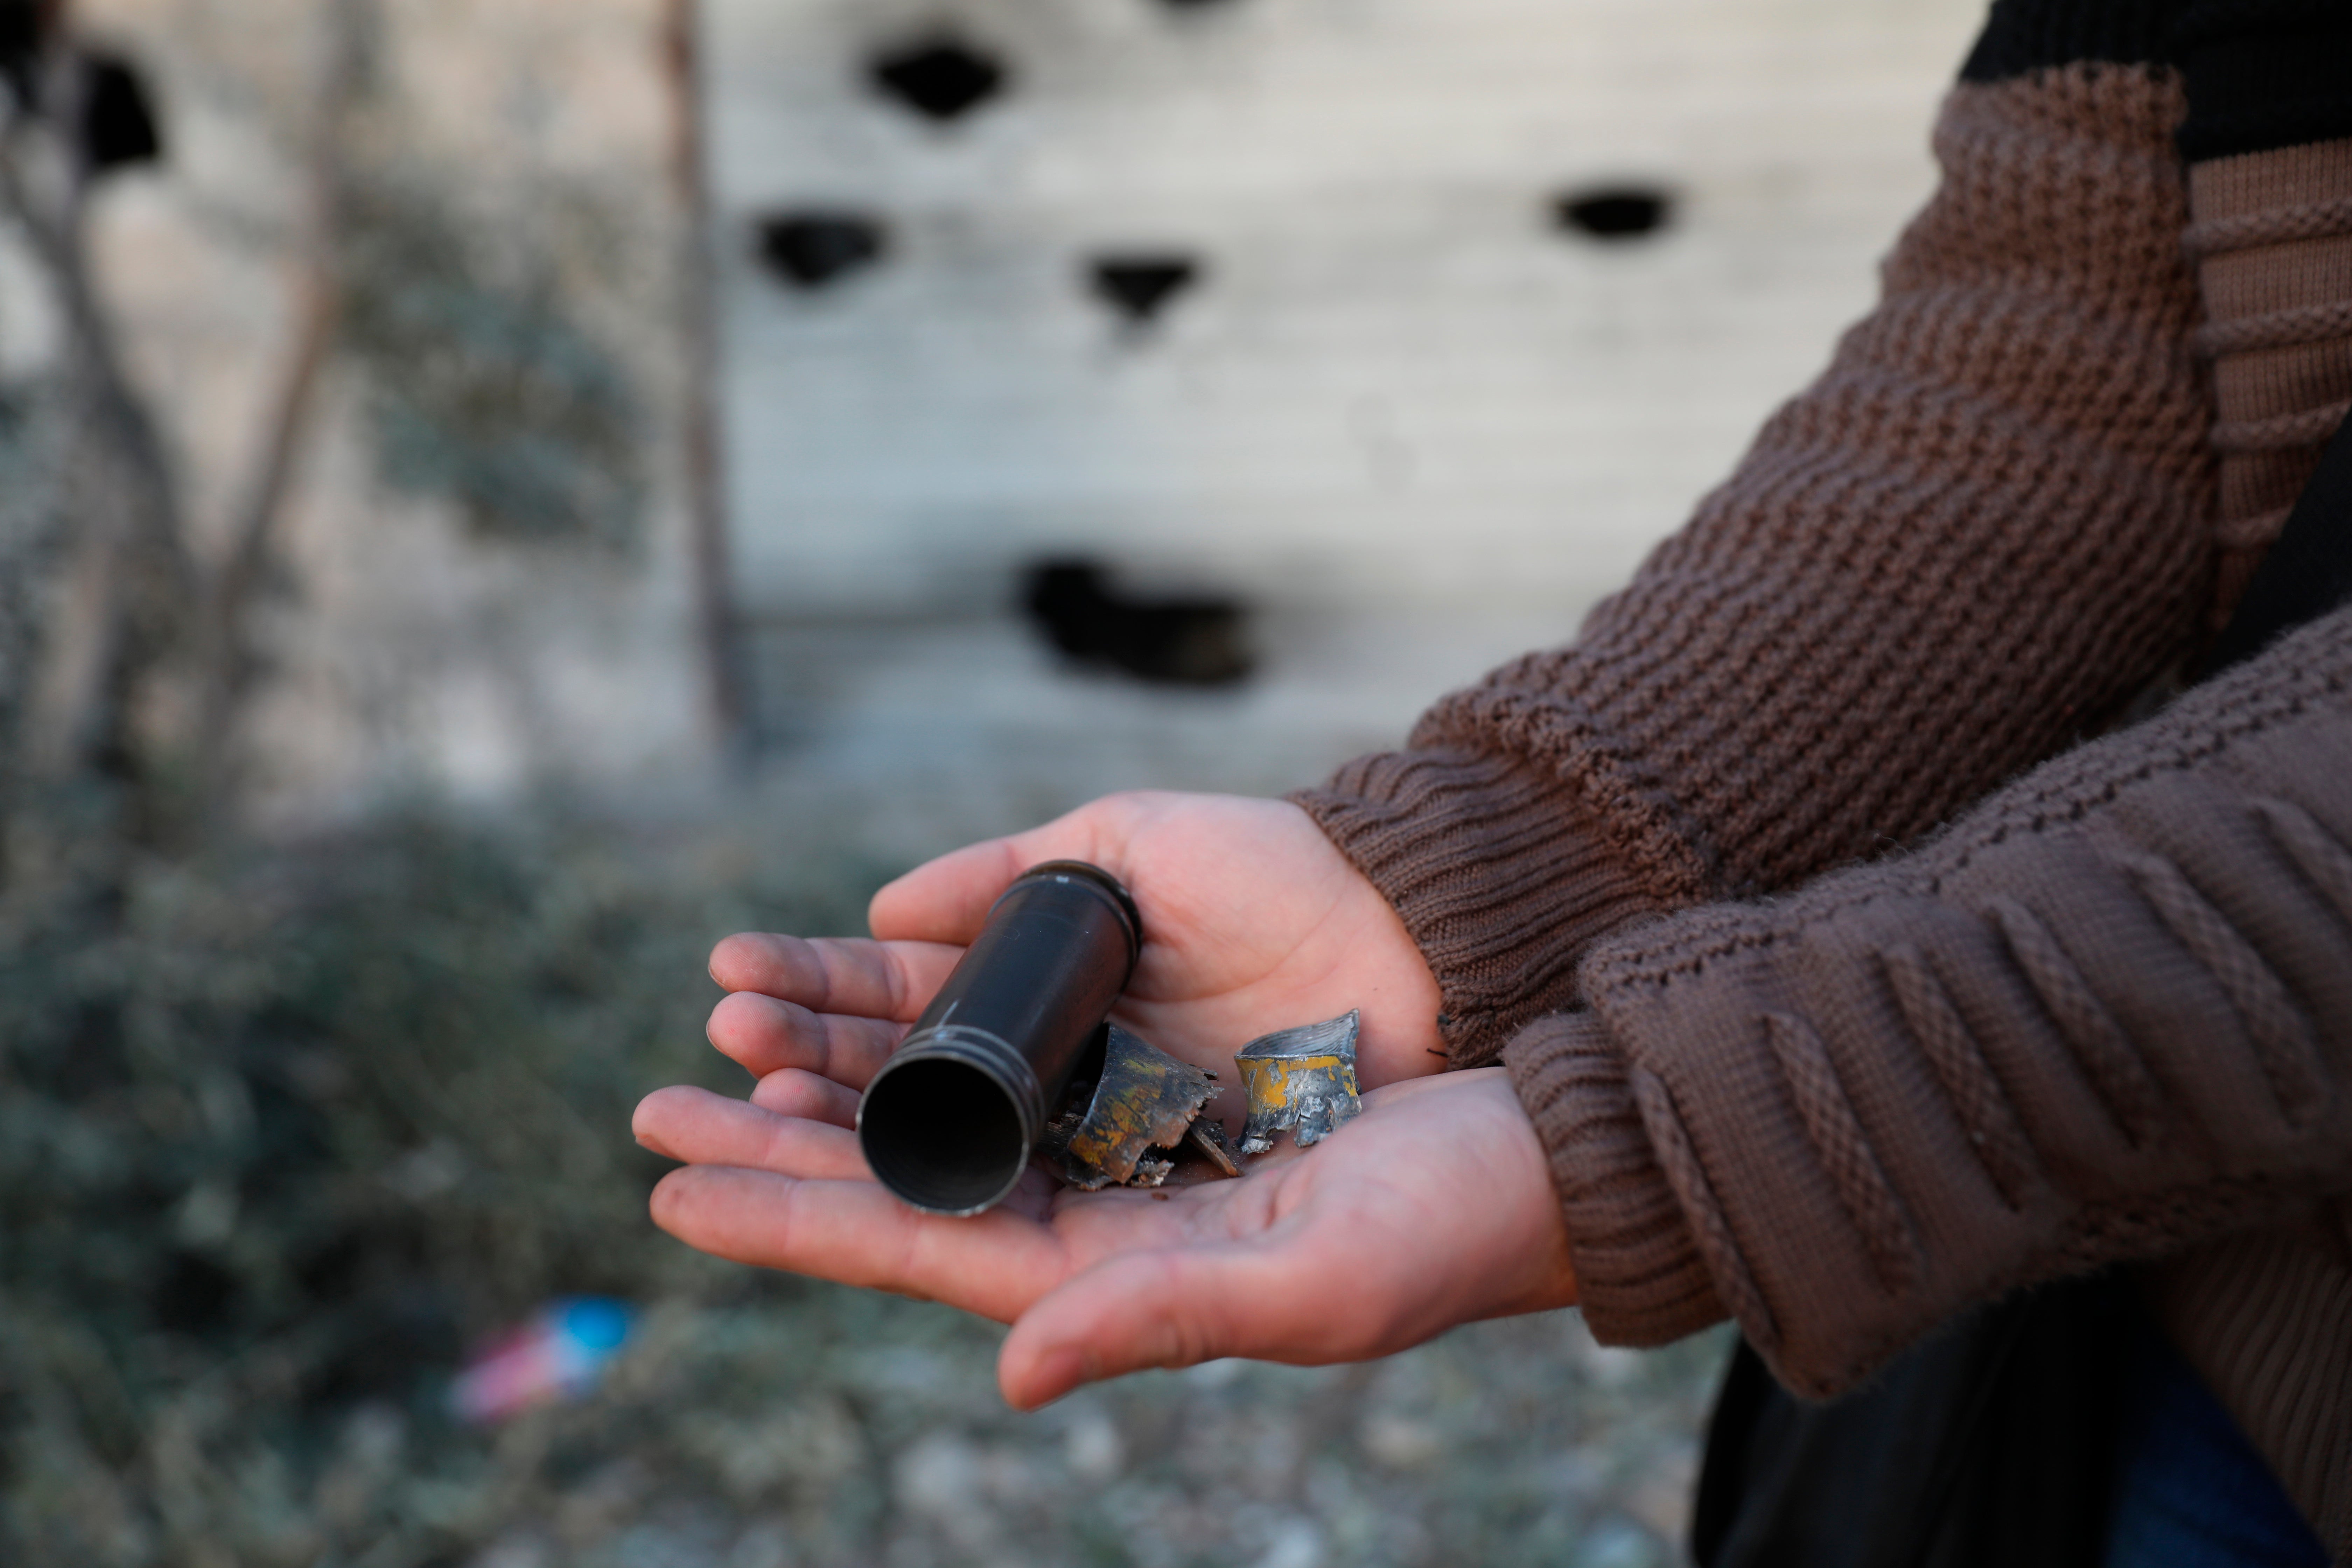 A child shows an empty bullet shell outside a destroyed house after an operation by the U.S. military in the Syrian village of Atmeh, in Idlib province, Syria, Thursday, Feb. 3, 2022